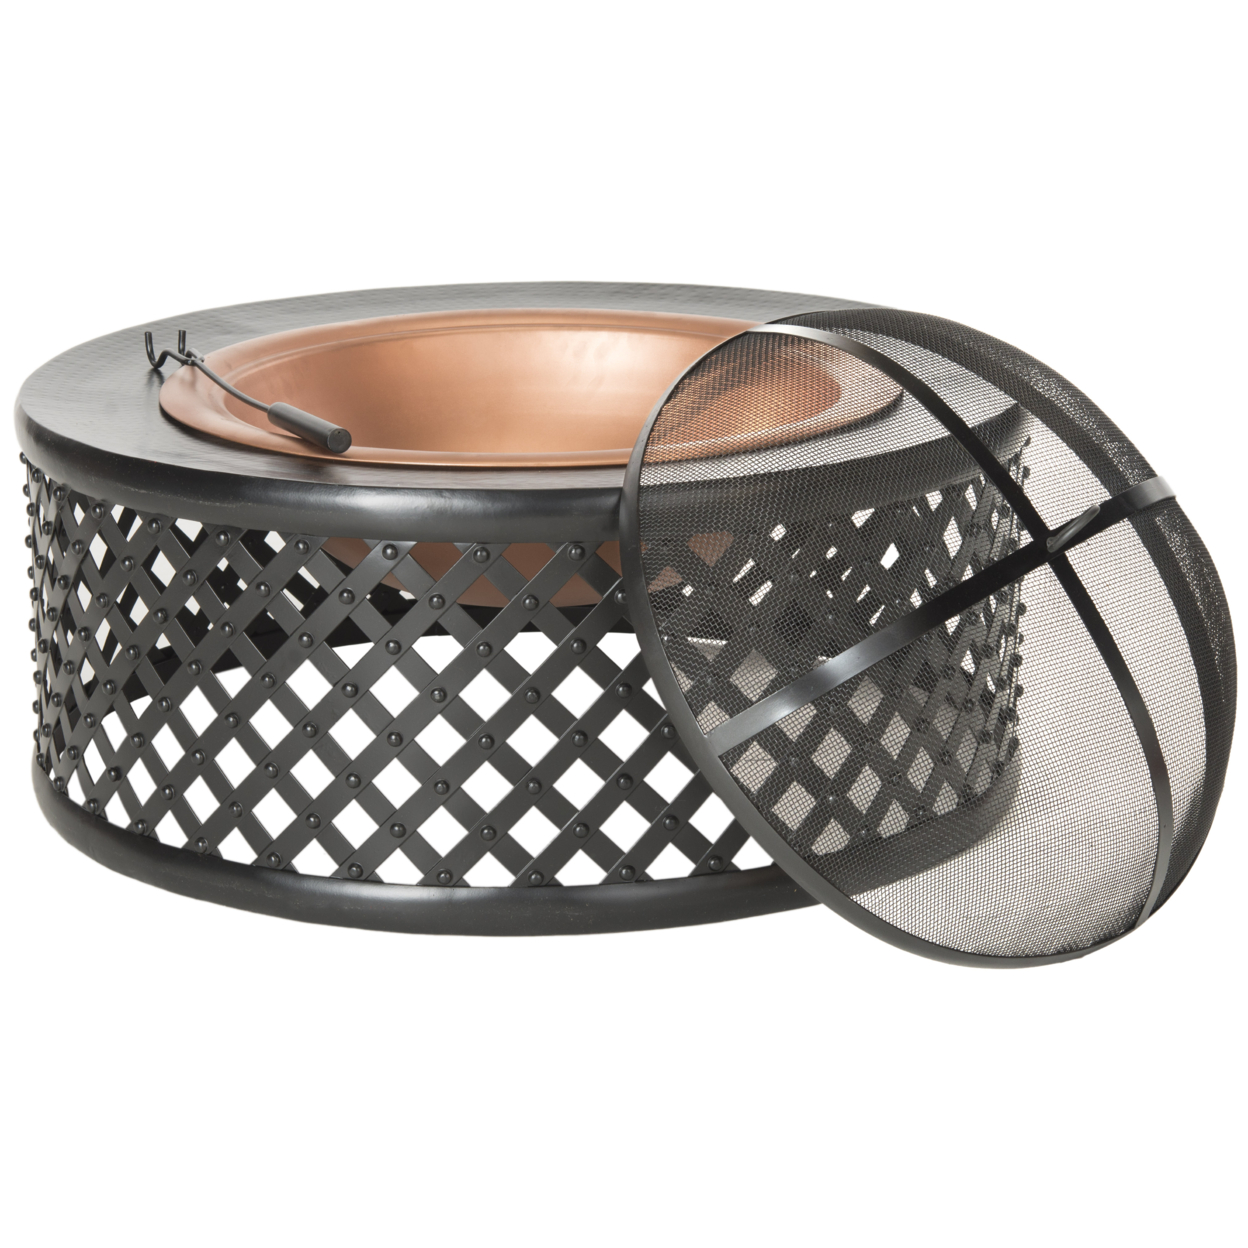 SAFAVIEH Outdoor Collection Jamaica Fire Pit Copper/Black